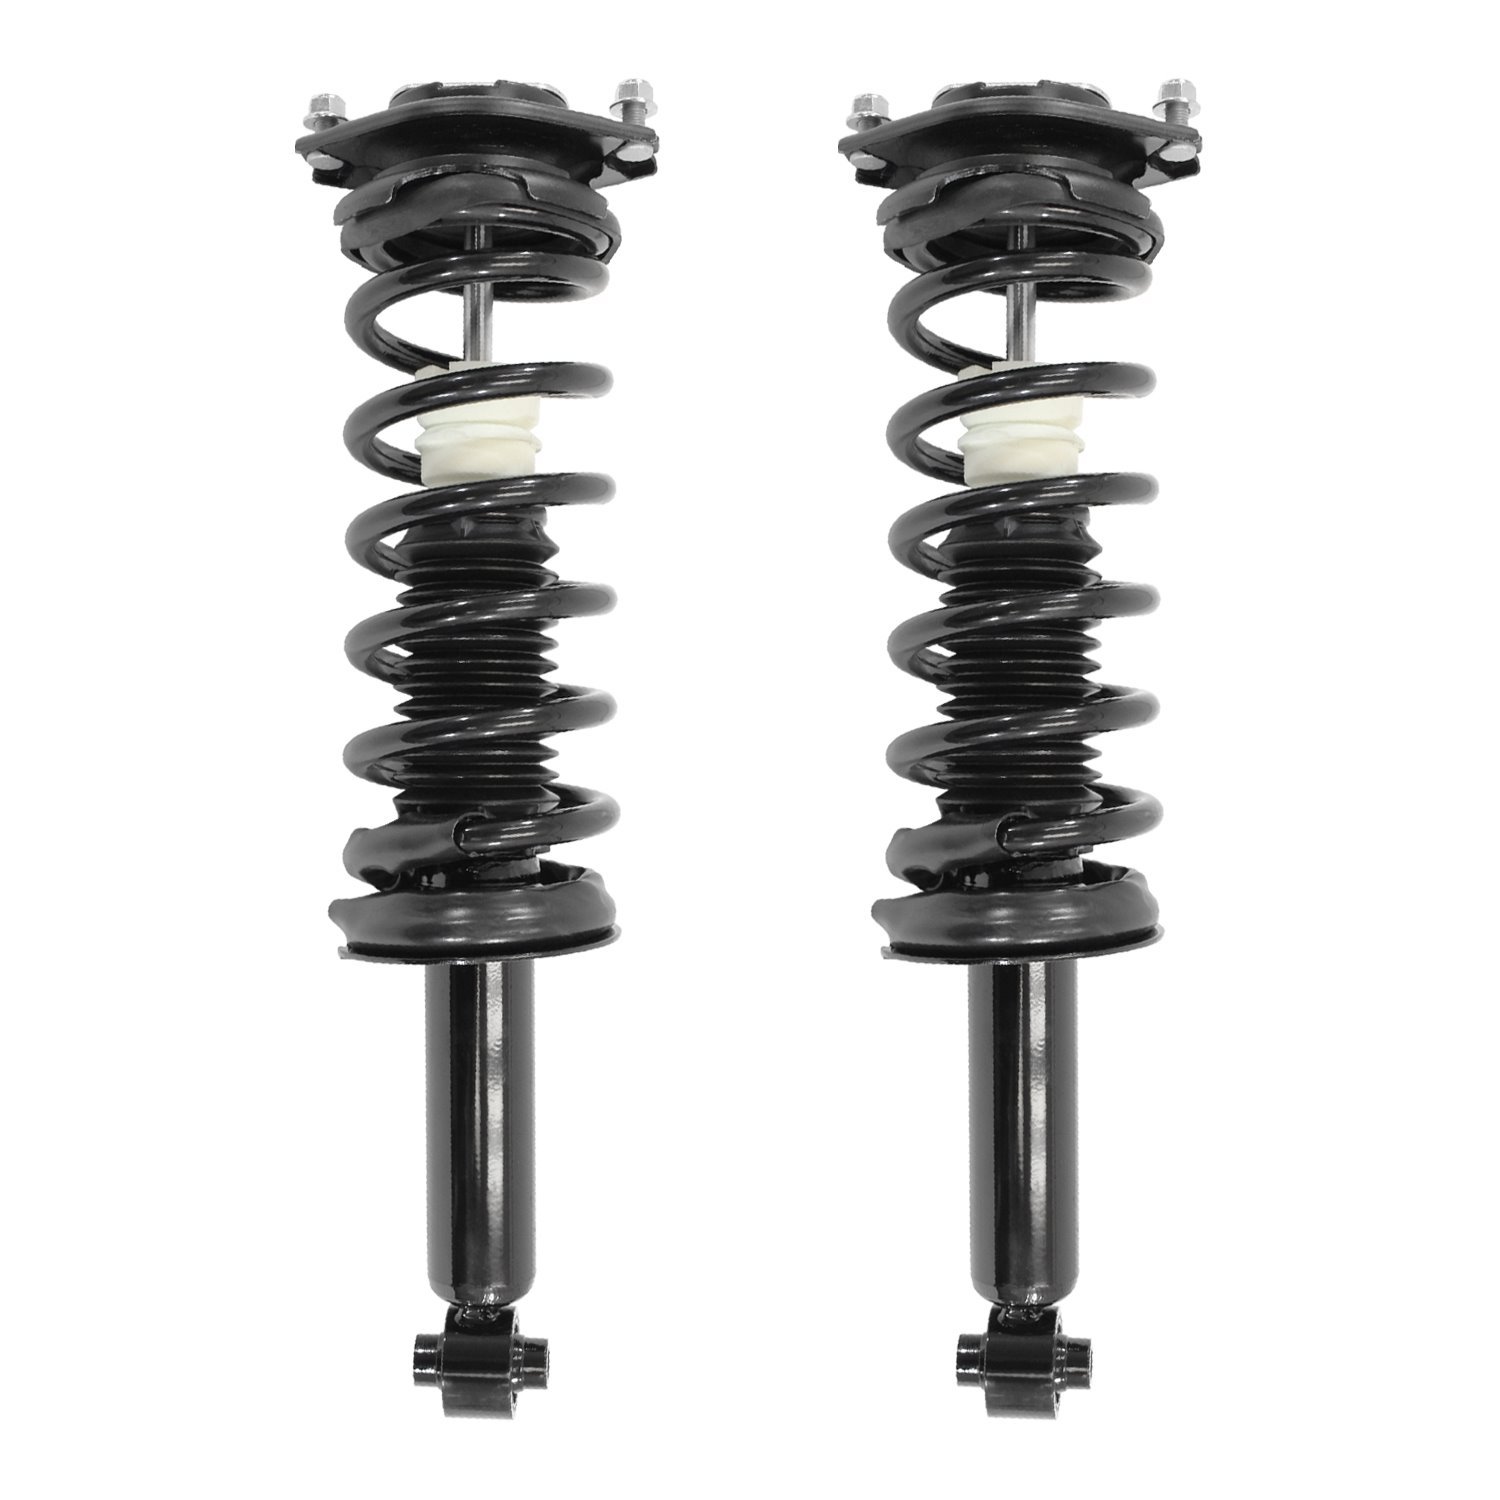 2-16100-001 Rear Suspension Strut & Coil Spring Assemby Set Fits Select Subaru Forester